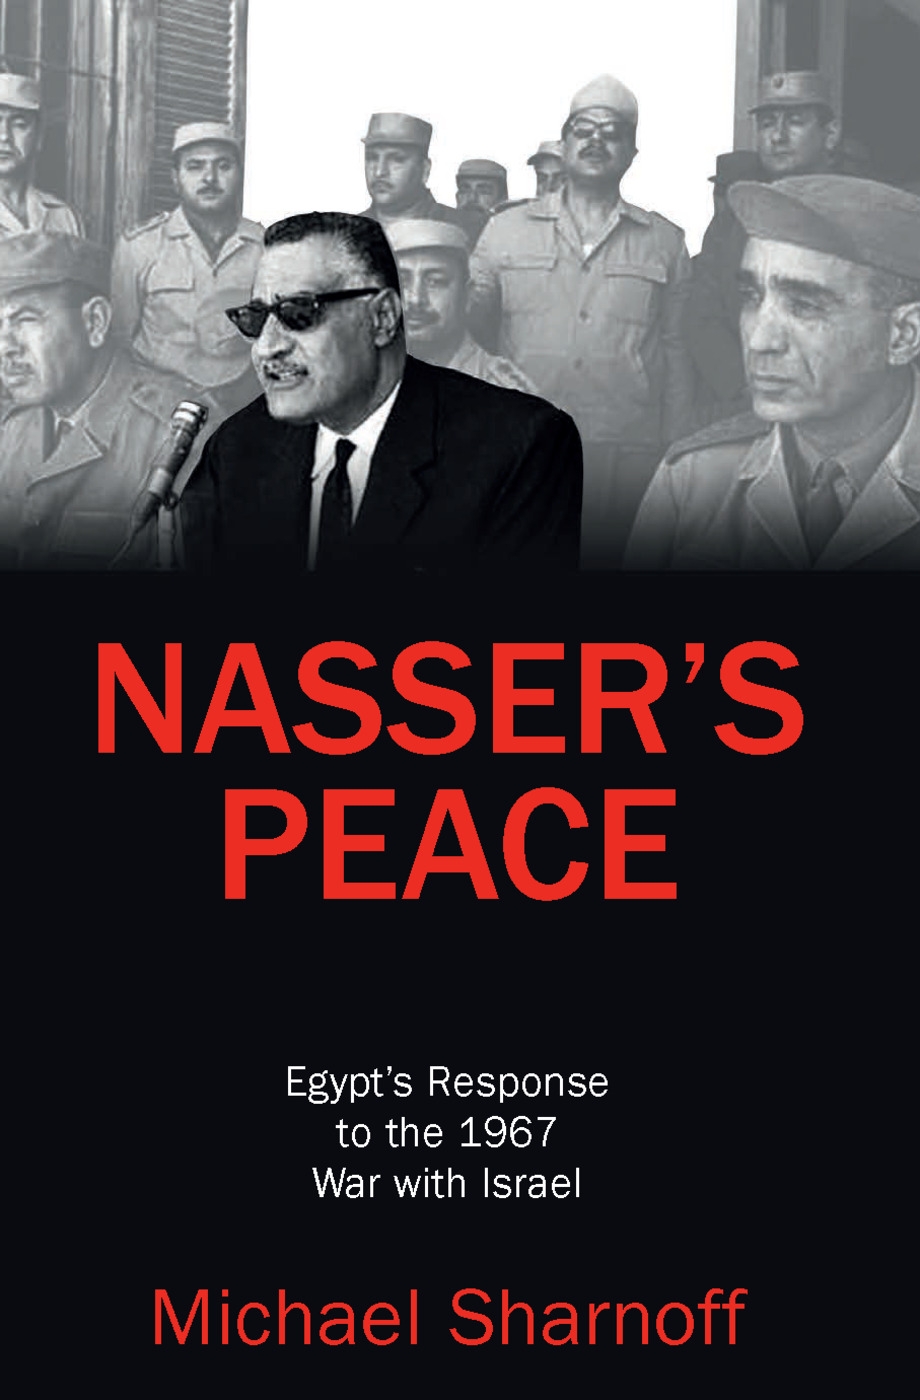 Nasser’s Peace: Egypt’s Response to the 1967 War with Israel